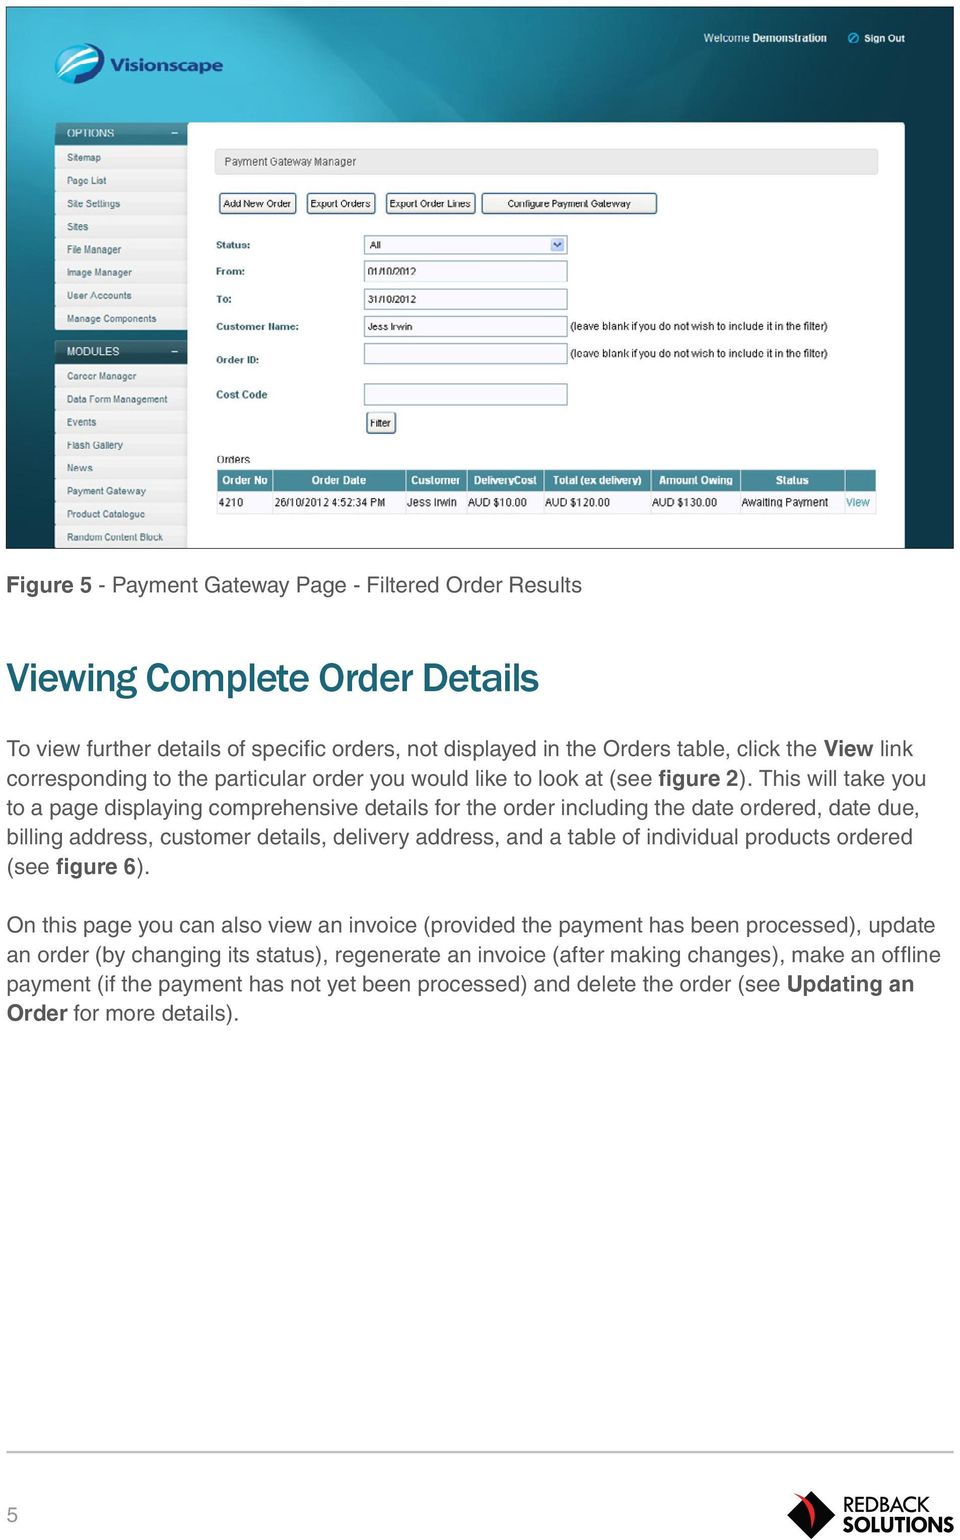 This will take you to a page displaying comprehensive details for the order including the date ordered, date due, billing address, customer details, delivery address, and a table of individual